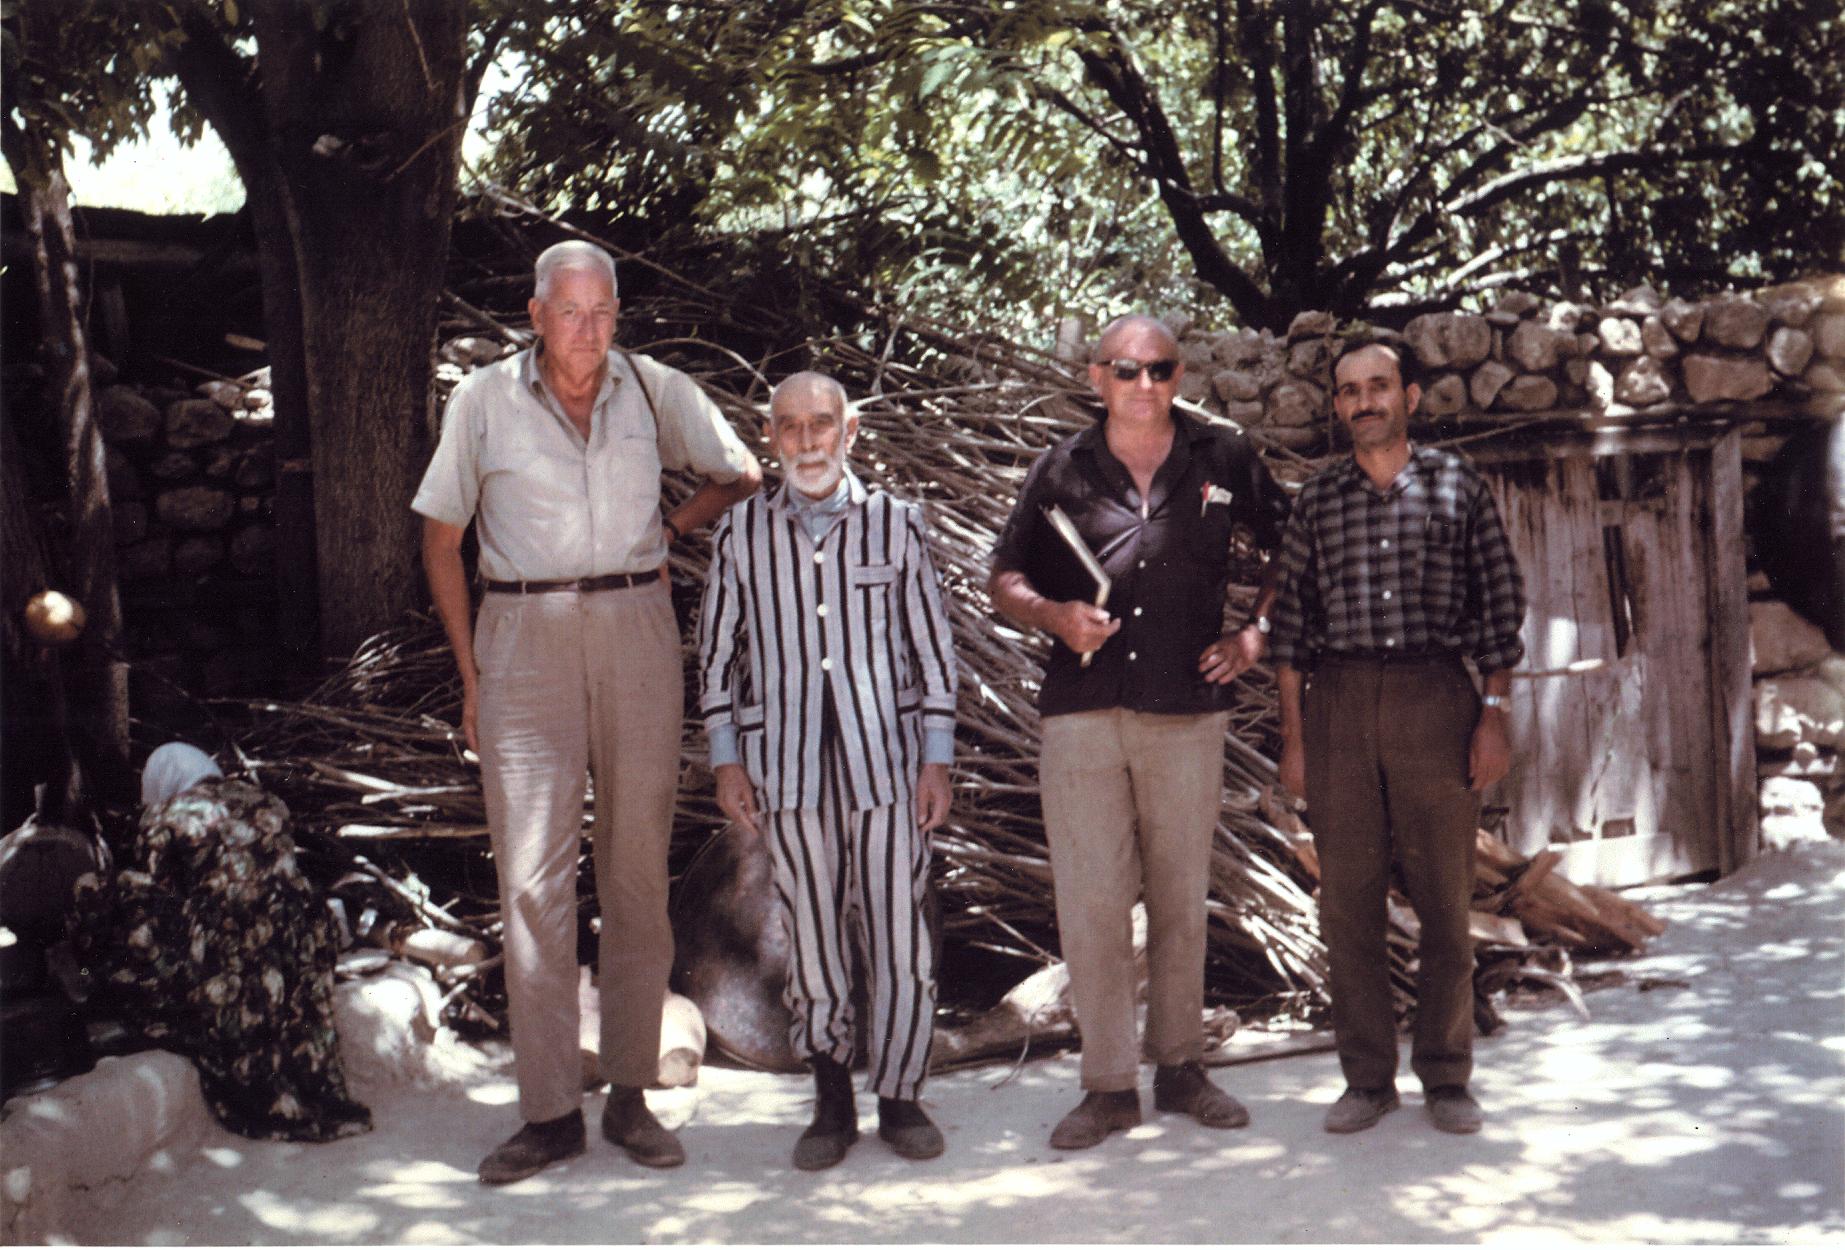 George (left), Terence Mitford (second right) and Turkish hosts, 1964 (G4.1)